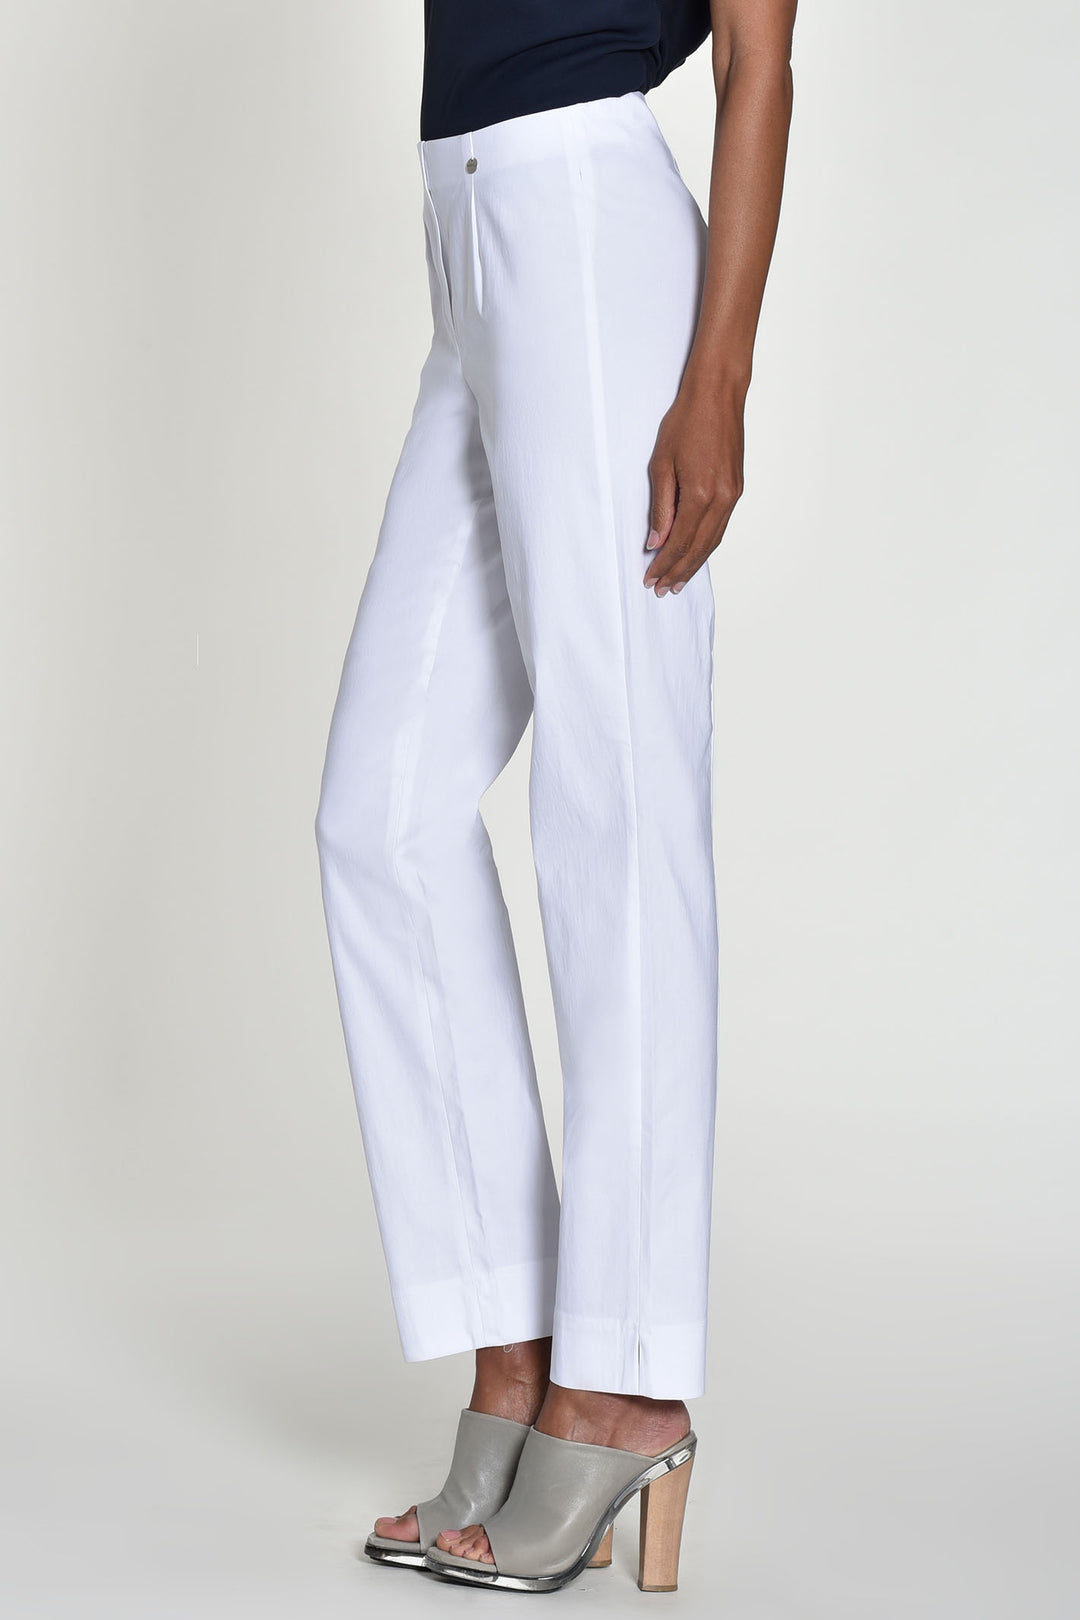 Robell 51412 5499 10 White Marie 78bm Trousers - Experience Boutique